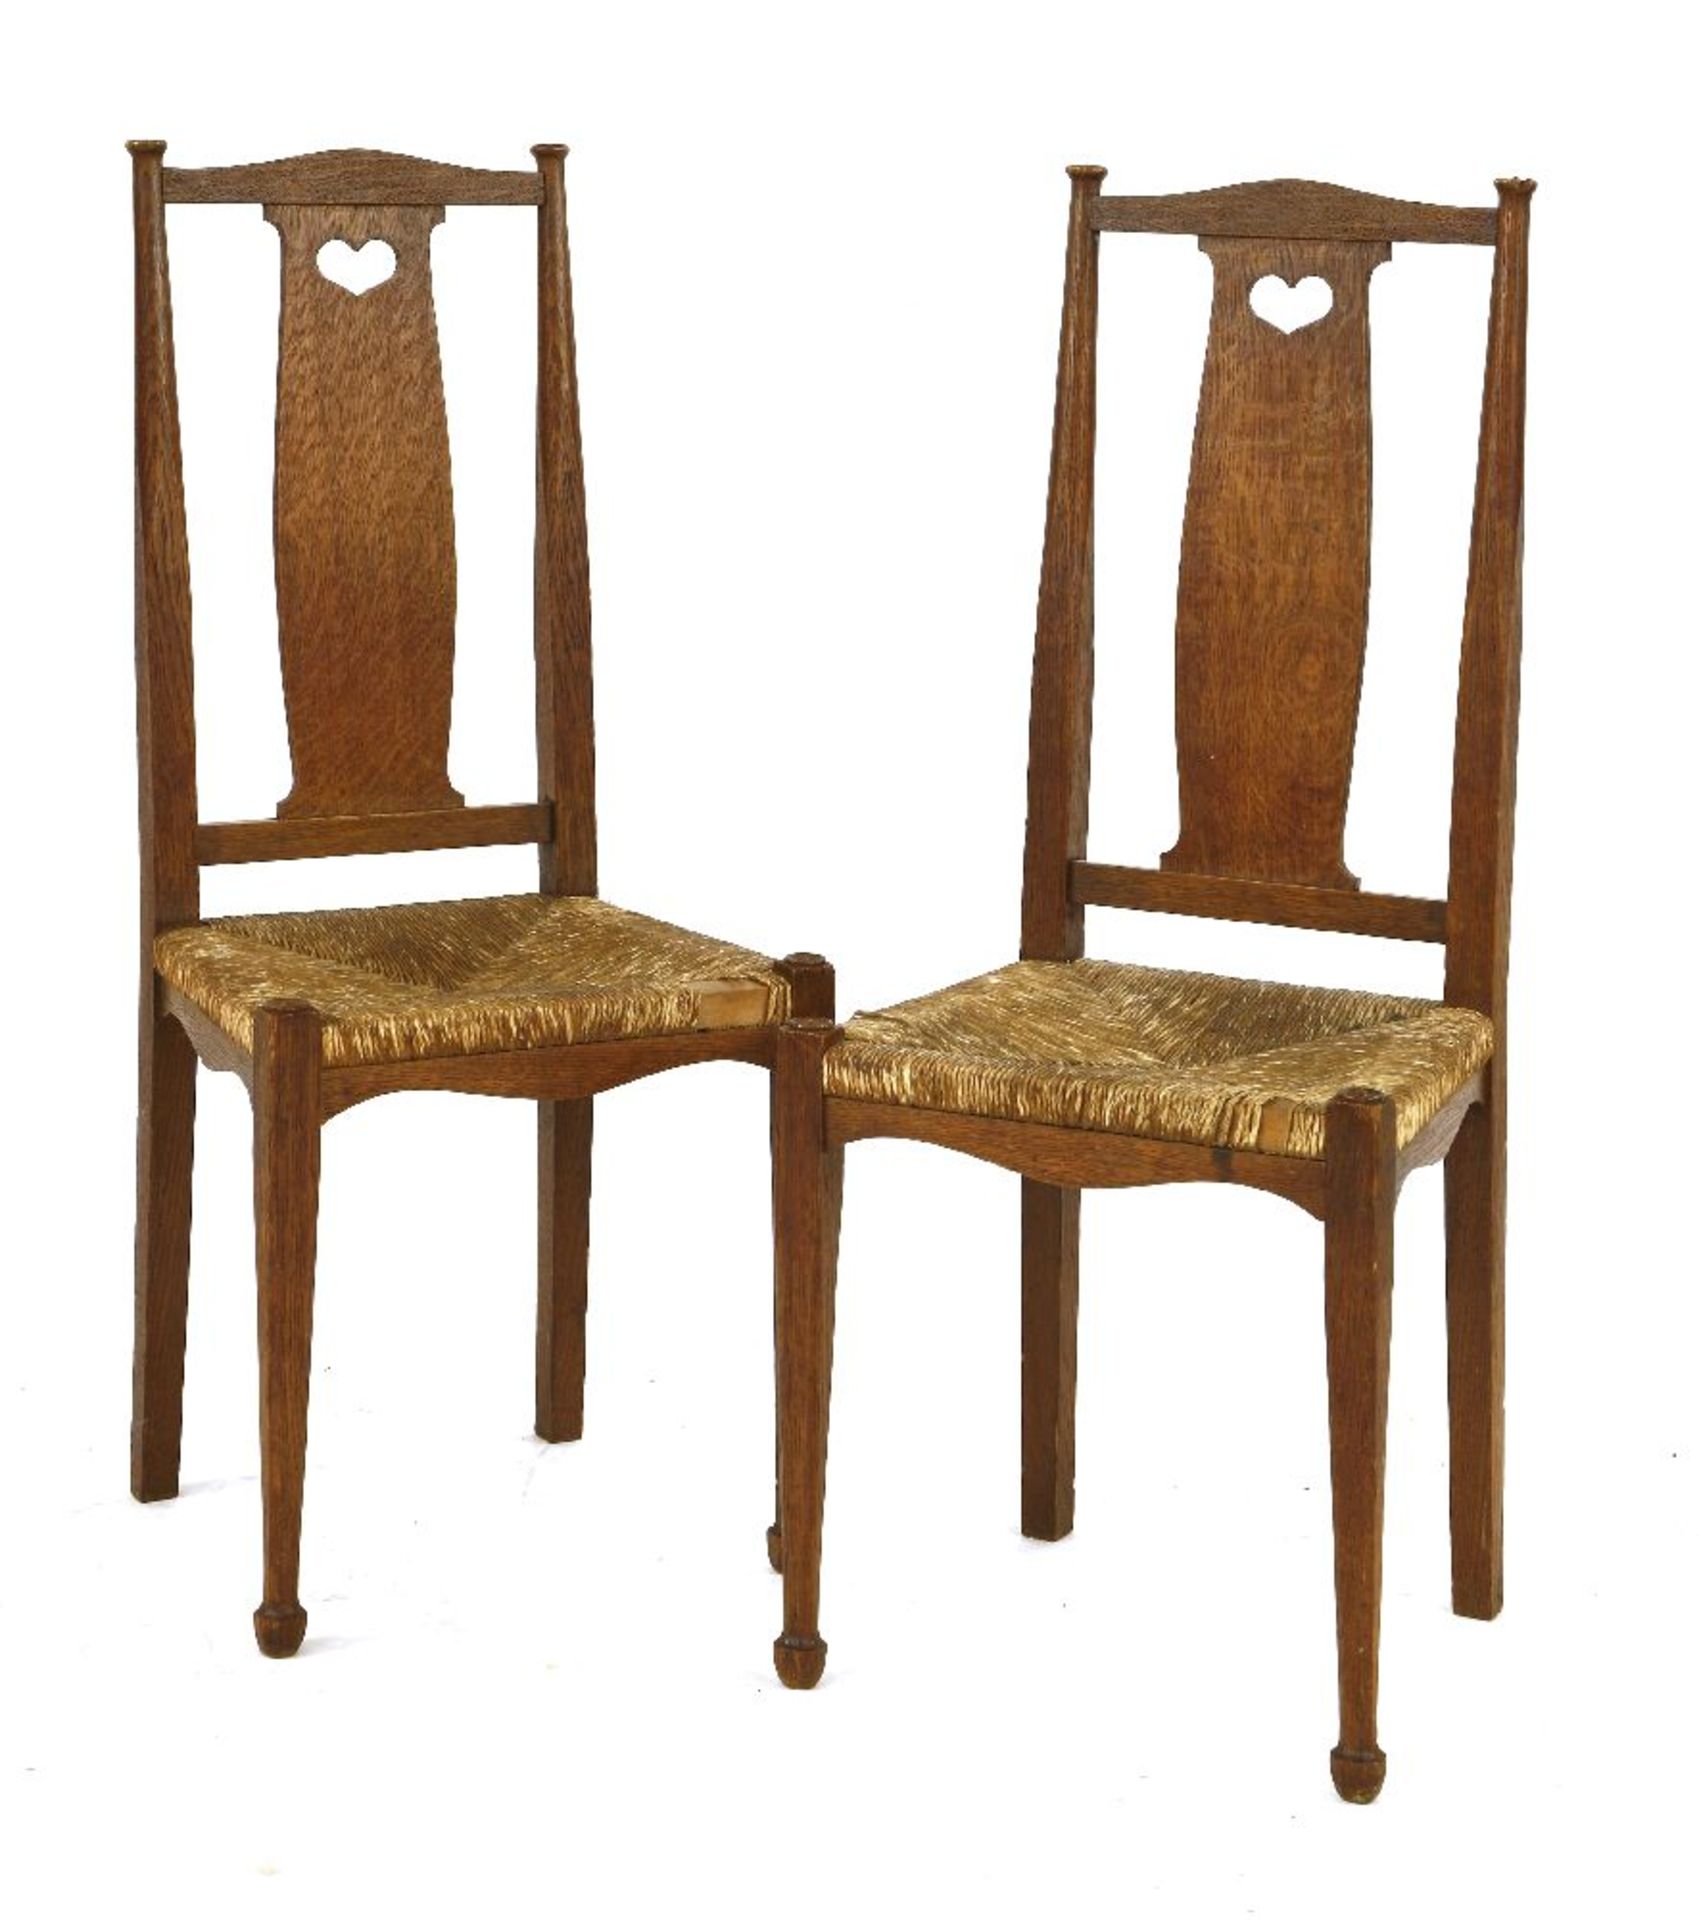 A pair of ‘Fine Feathers’ oak bedroom chairs, designed by Ambrose Heal for Heal & Son, each with